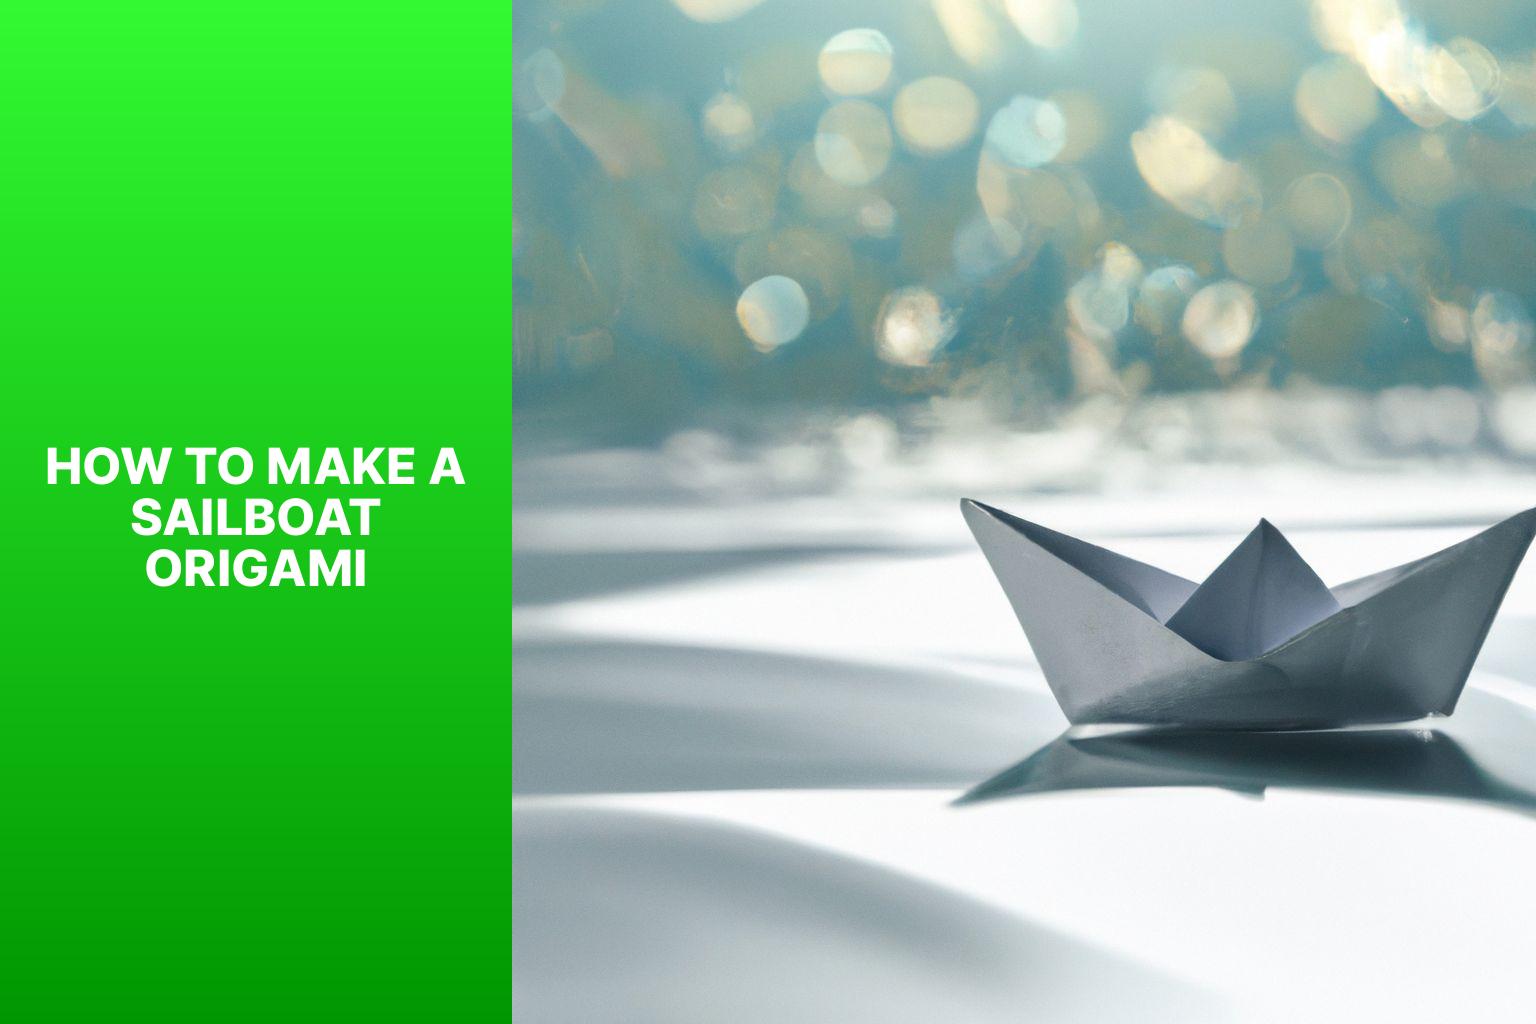 Learn How to Make a Sailboat Origami: Step-by-Step Guide